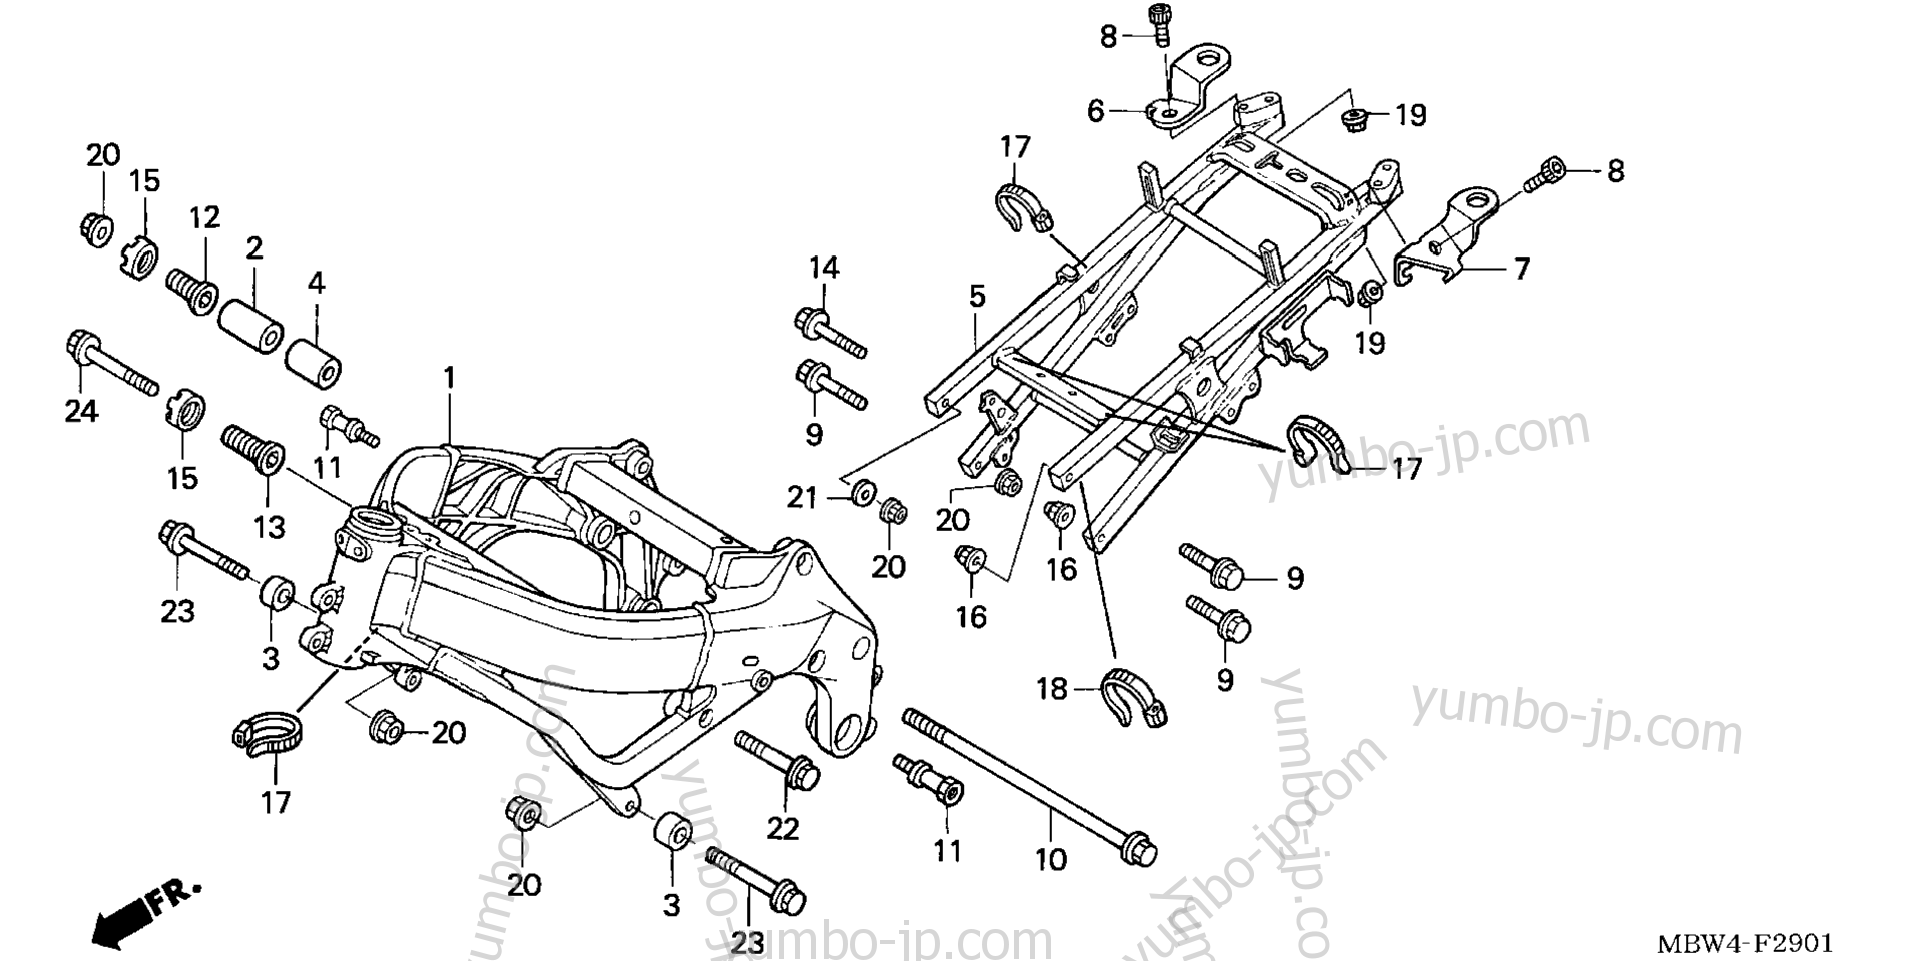 FRAME ('04-'06) for motorcycles HONDA CBR600F4 A 2006 year